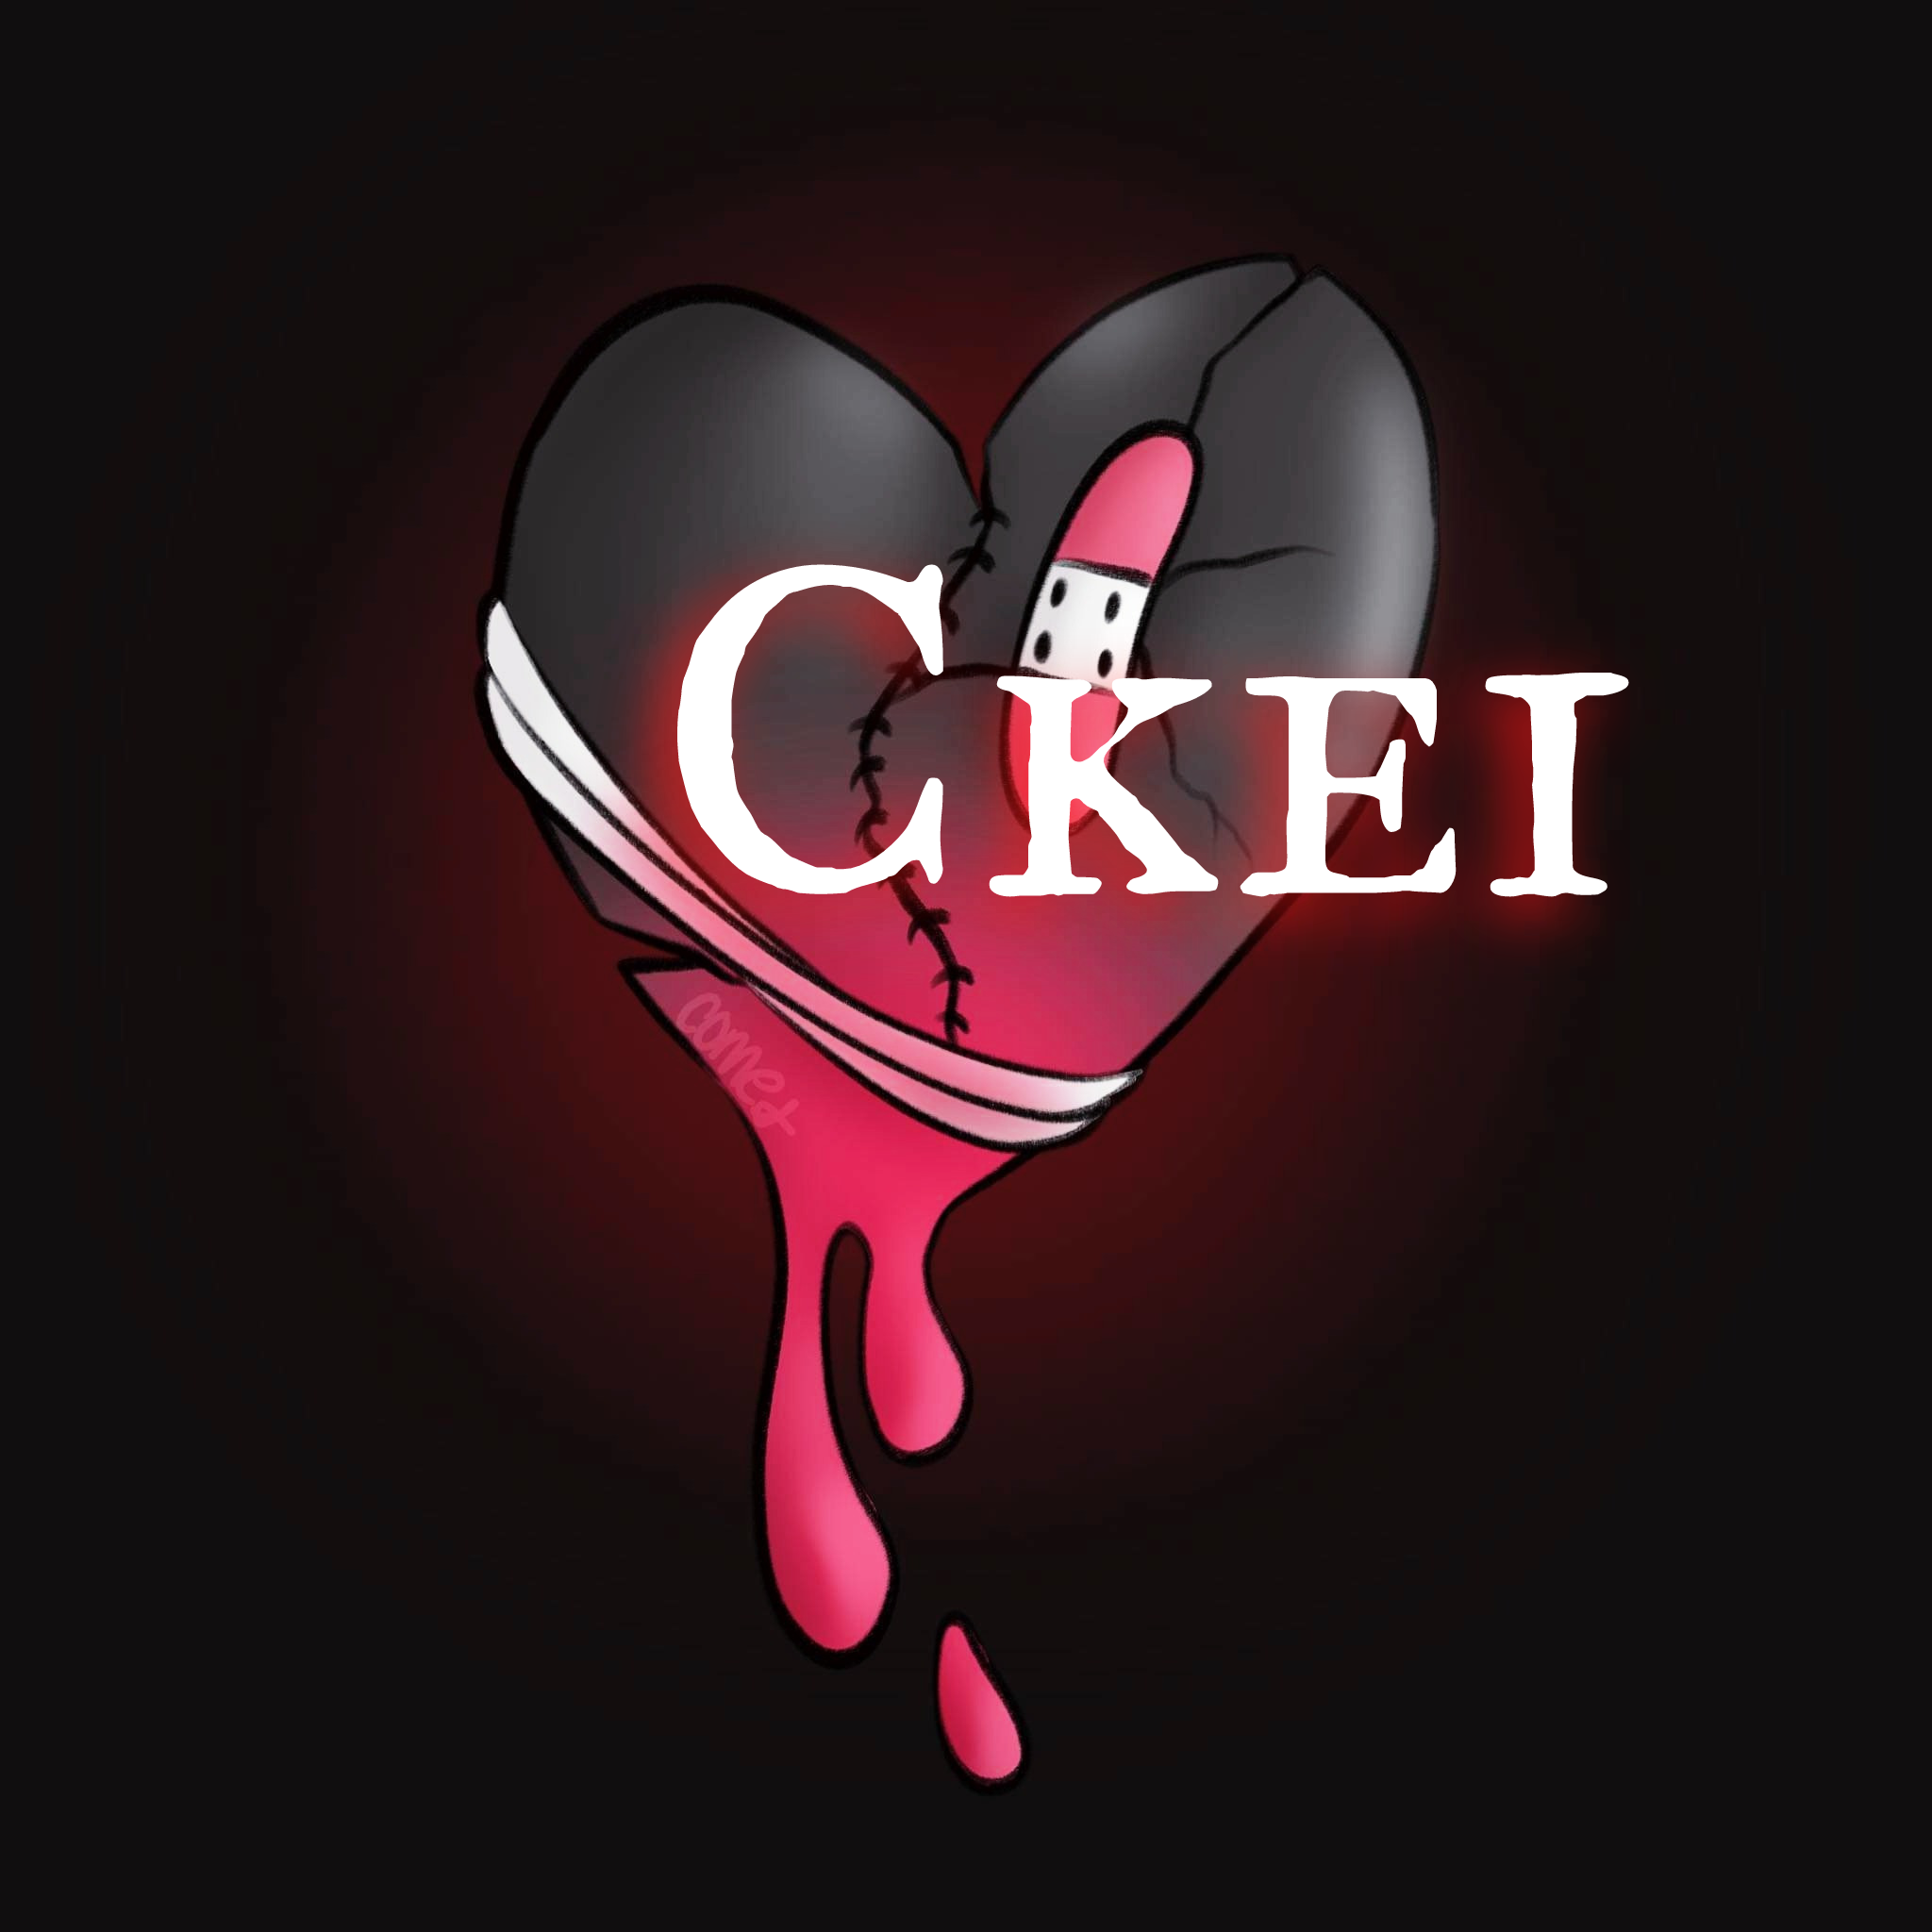 Ckei Breathes hope and optimism to Everyone Facing Hardships or Struggles.